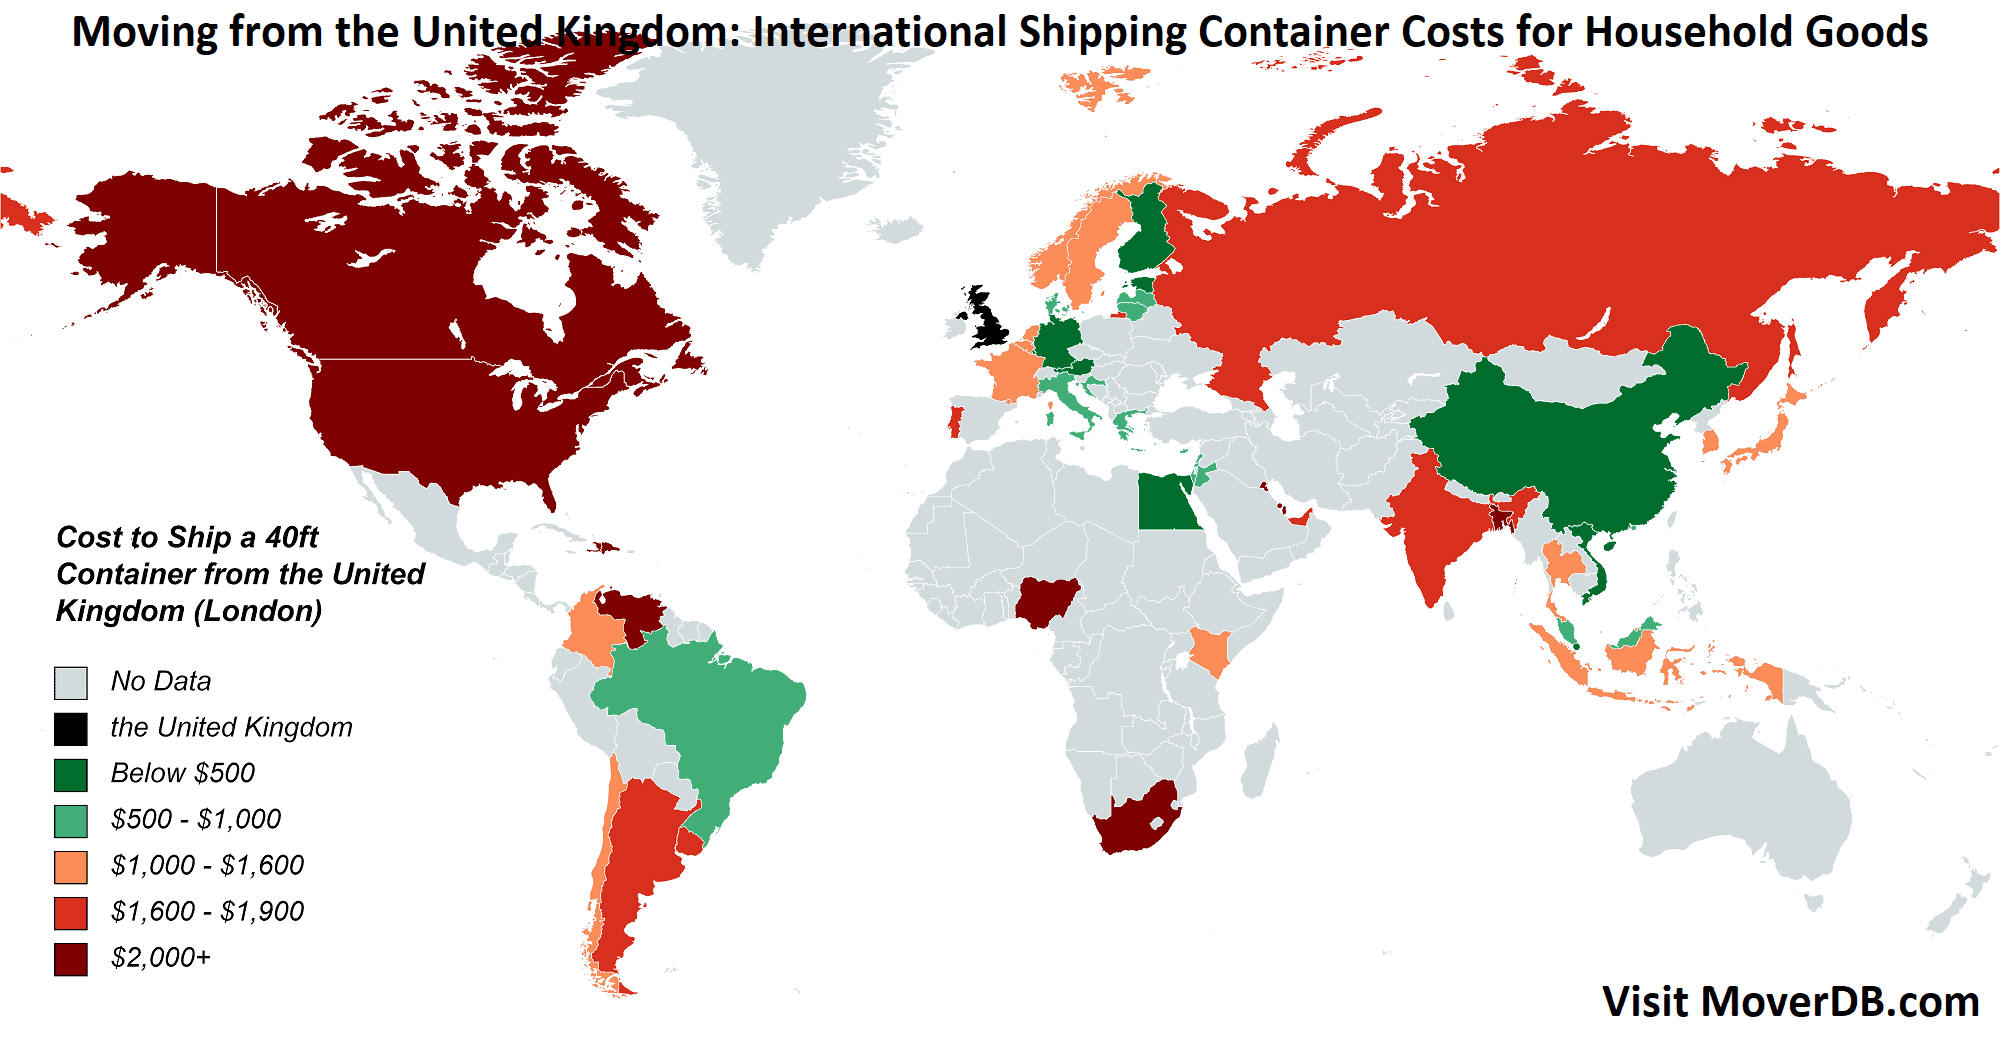 Shipping Container Costs from the United Kingdom (London)